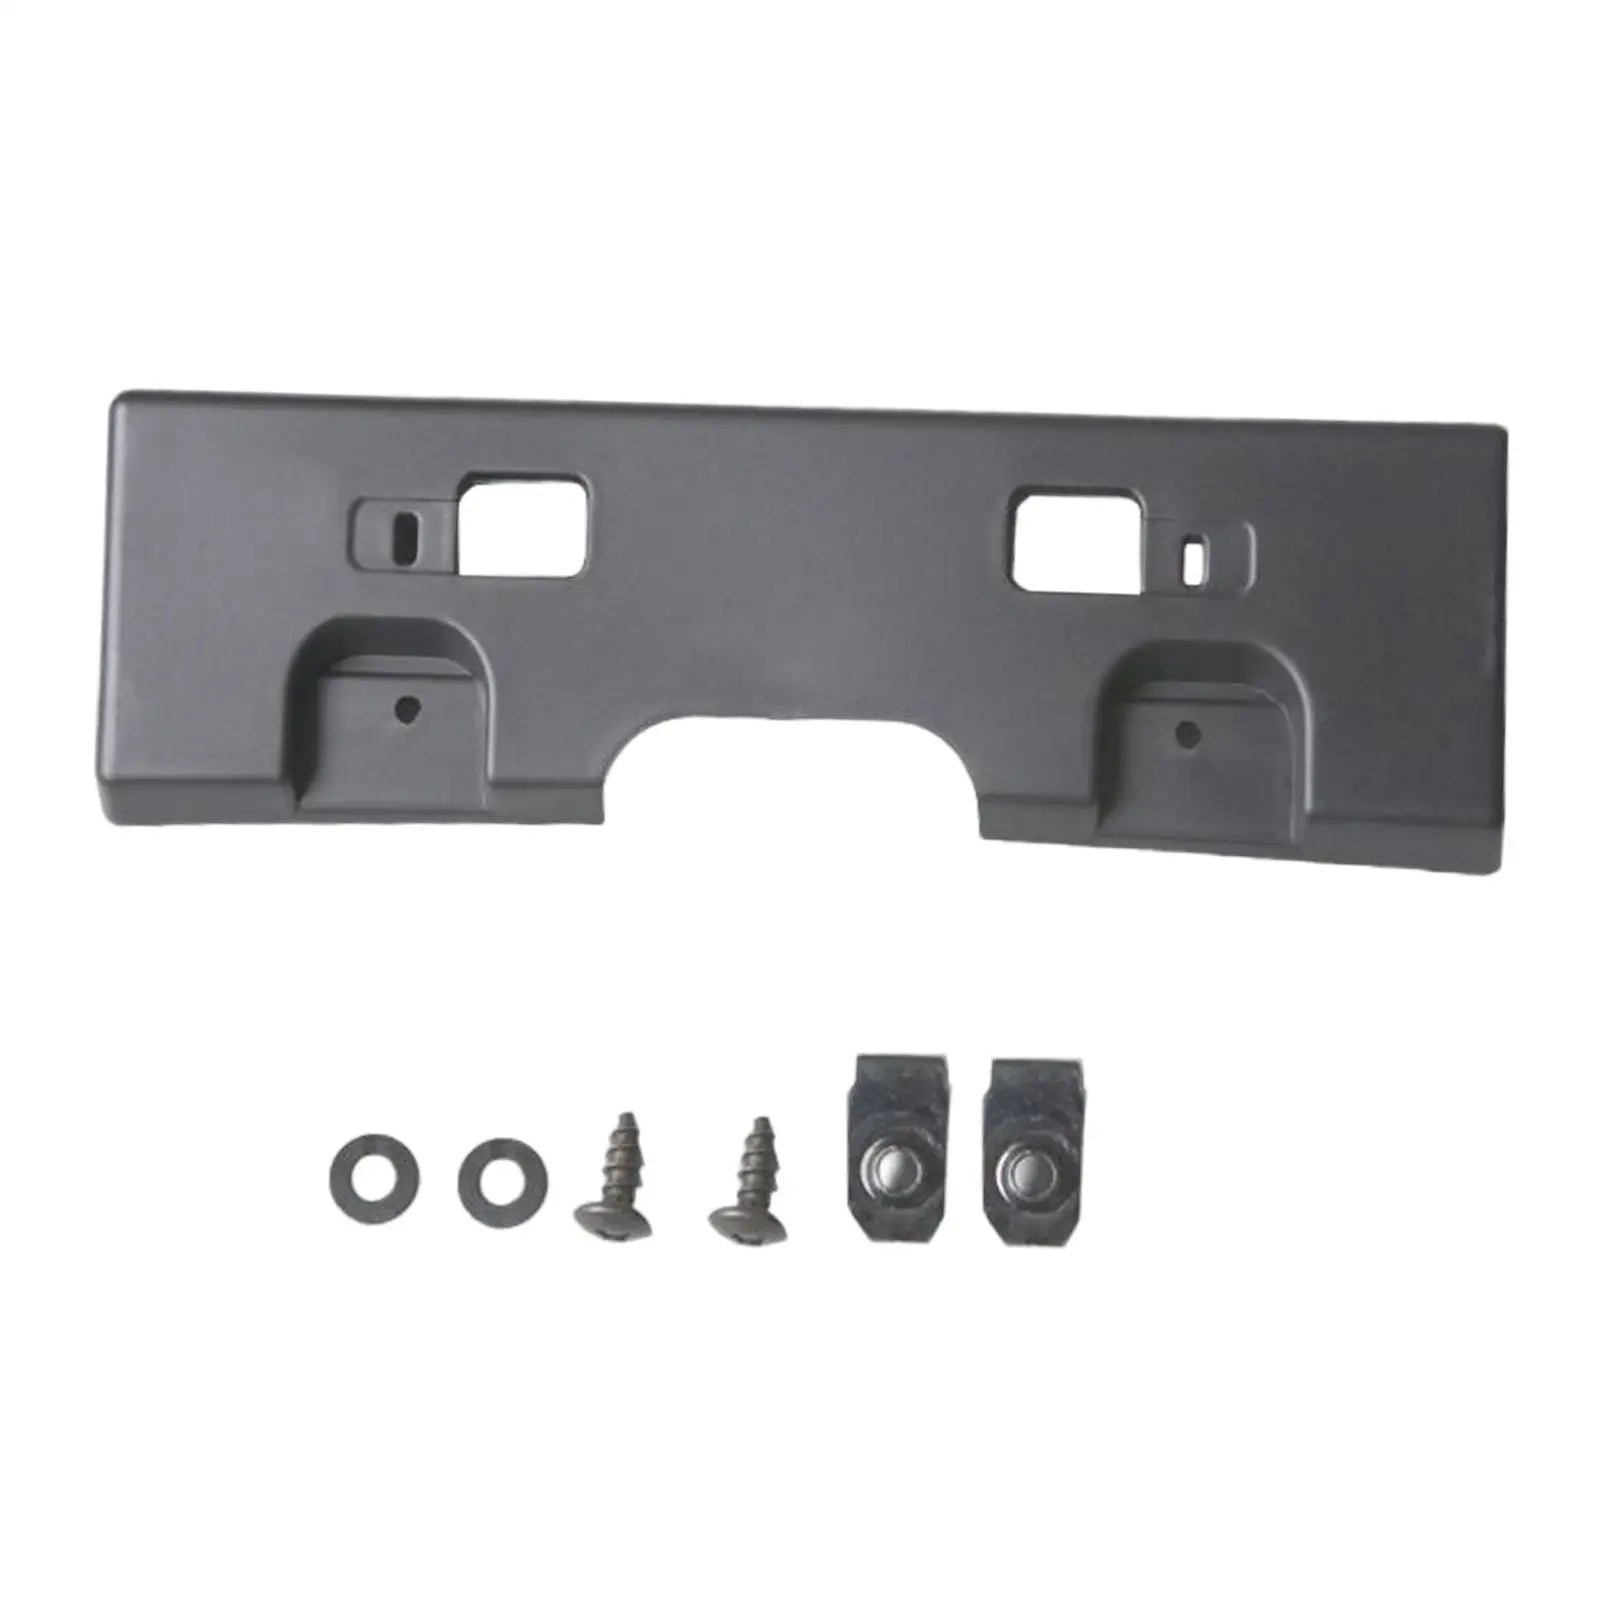 Front Bumper License Plate Bracket License Tag Holder for SENTRA 2007-2012 847227091233 Car Supplies Replacement